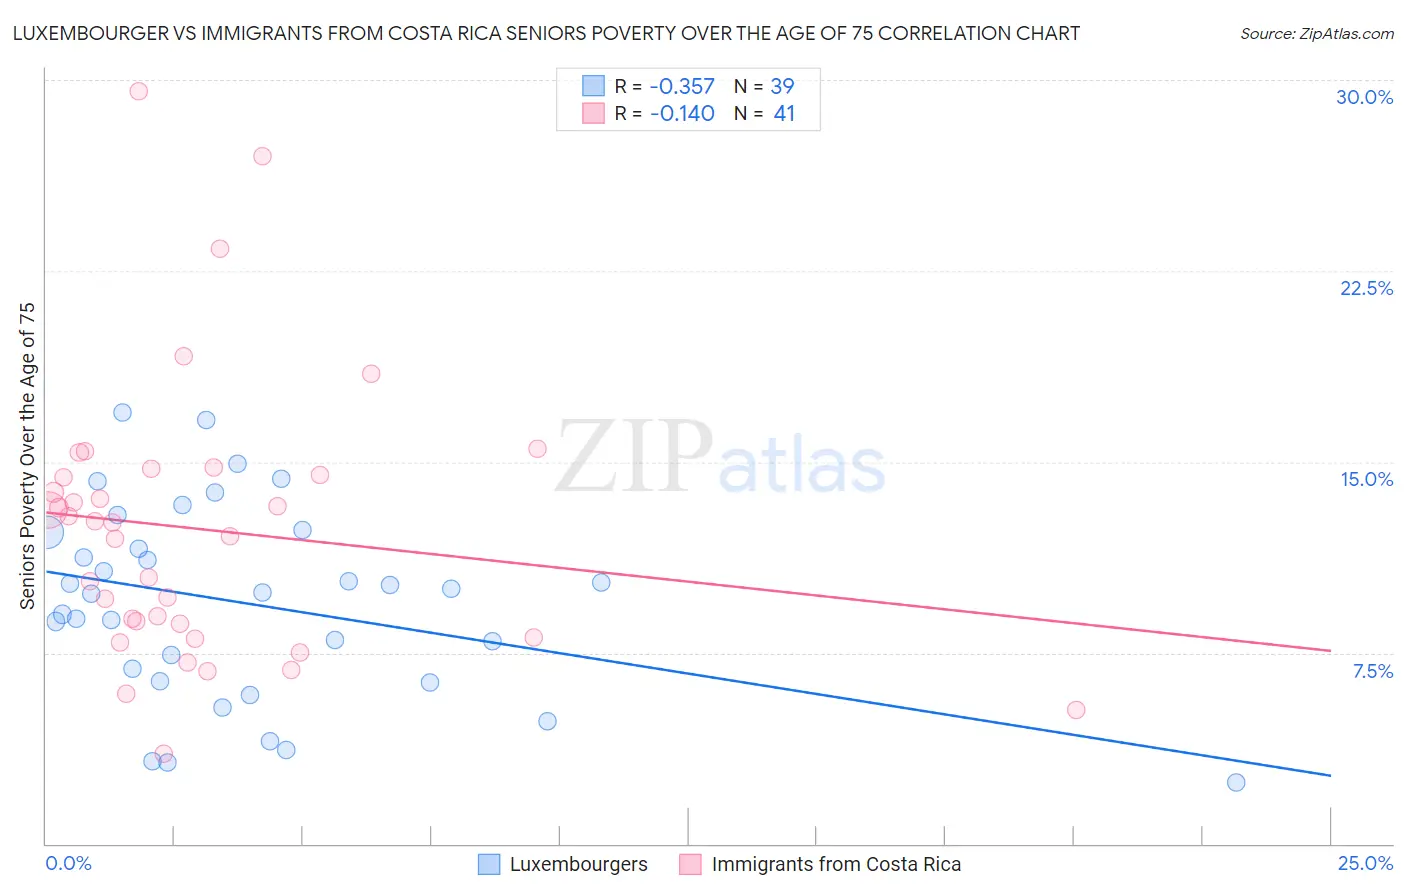 Luxembourger vs Immigrants from Costa Rica Seniors Poverty Over the Age of 75